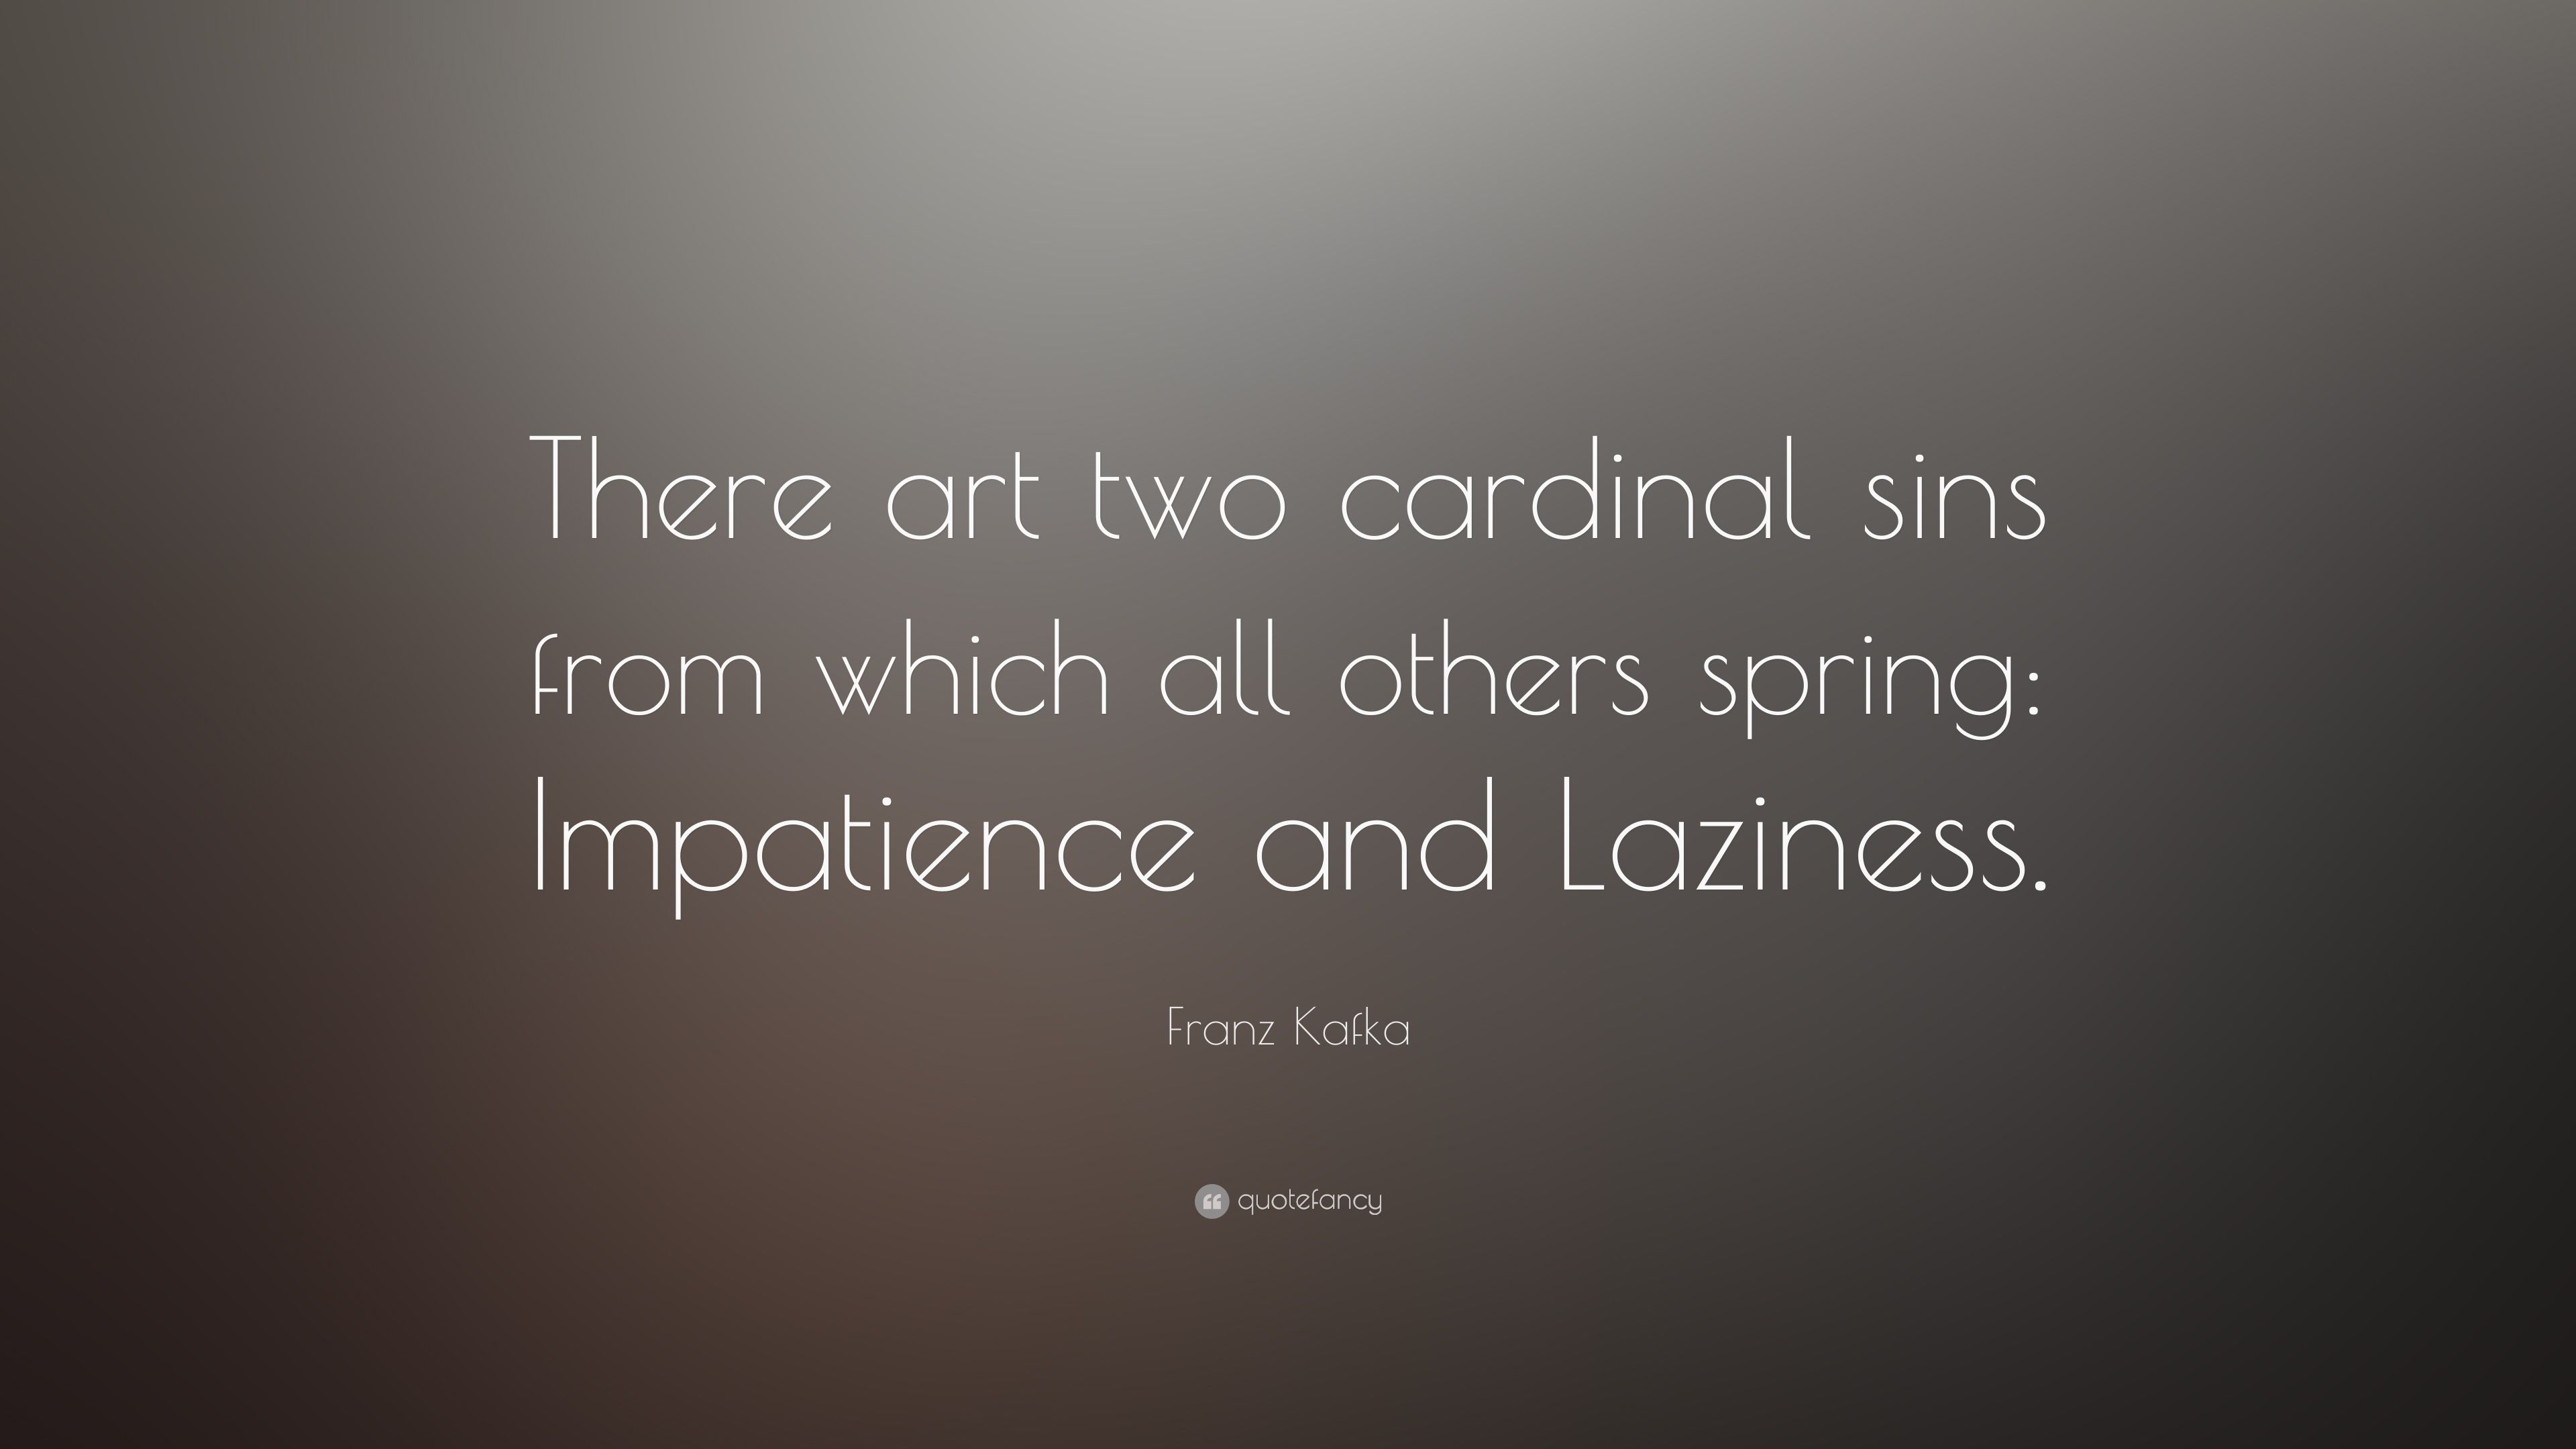 Franz Kafka Quote: “There art two cardinal sins from which all